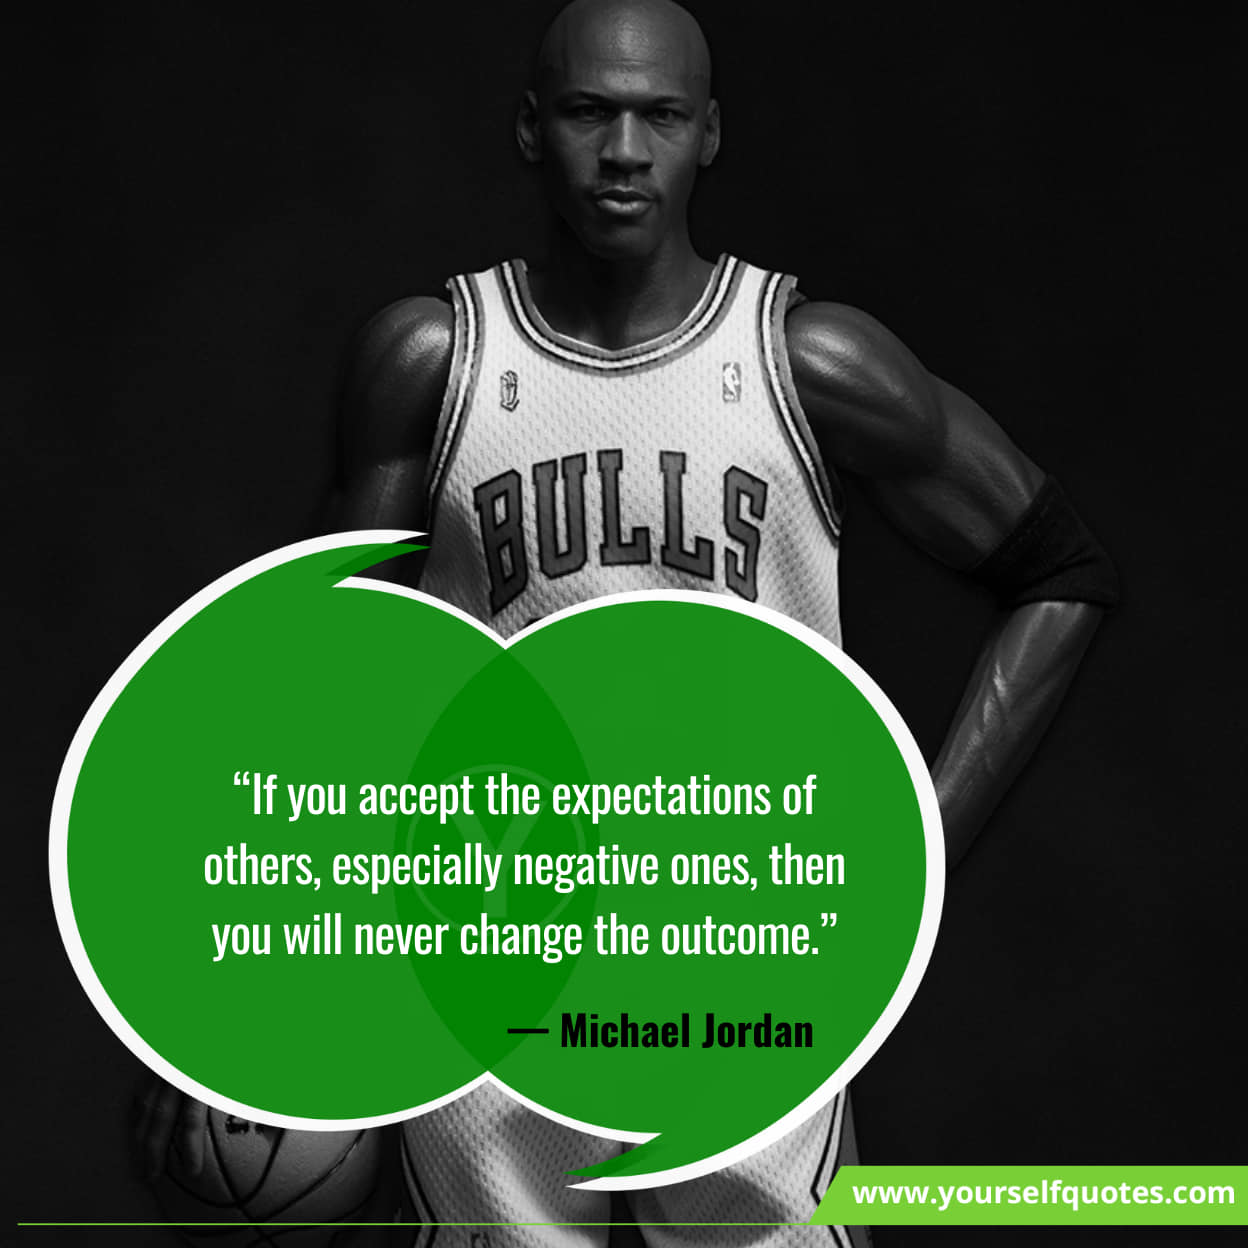 Quotes for perseverance by Michael Jordan